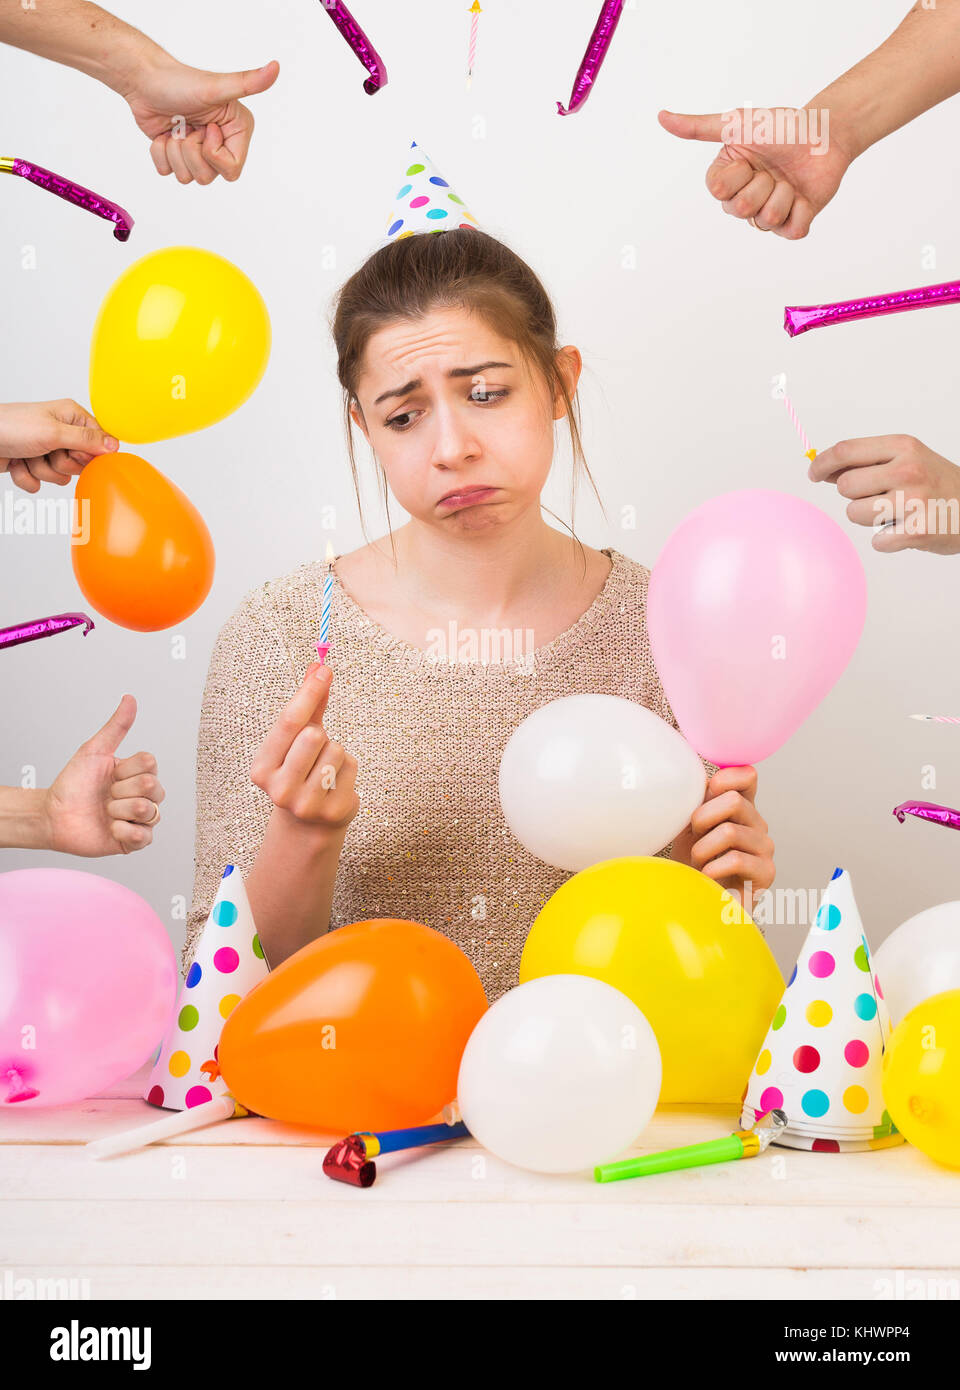 emotions, sentiments, birthday party concept. very sad disheveled girl, that is sulking, she is surrounded by colorful balloons, party hats with dots, hands with thumbs up and whistles Stock Photo